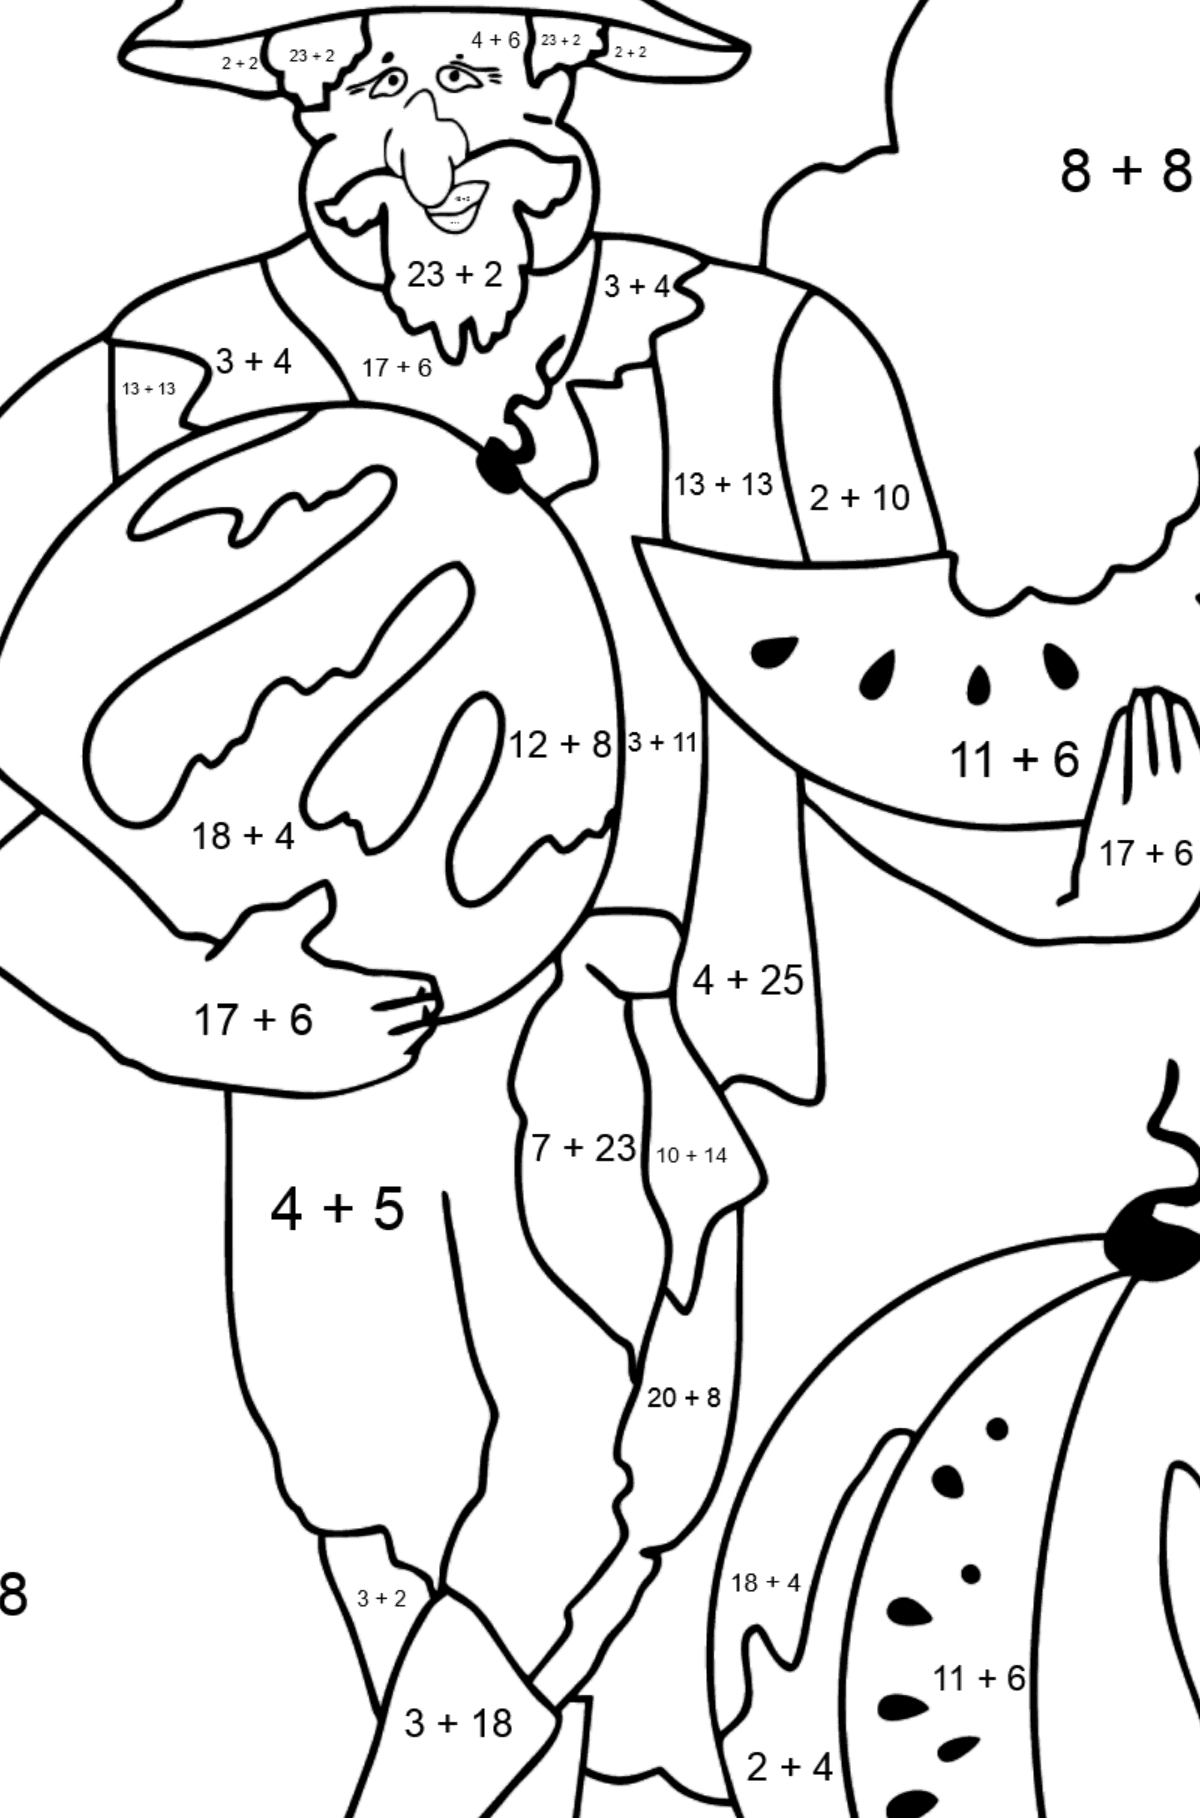 Coloring Page - A Pirate is Sharing a Ripe Watermelon - Math Coloring - Addition for Kids